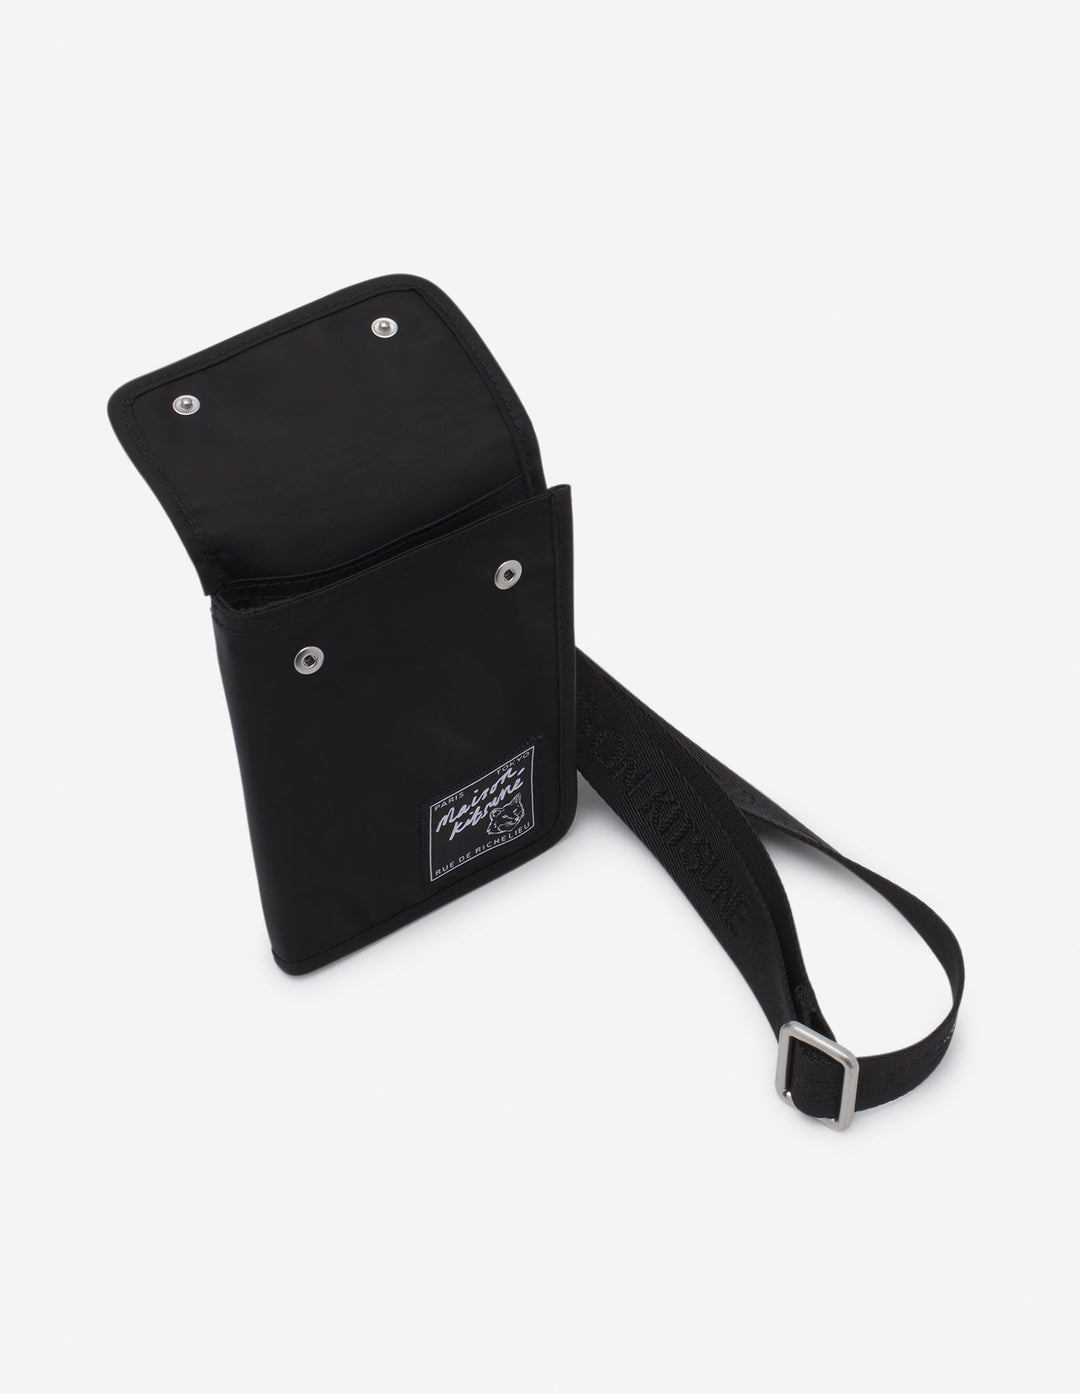 "THE TRAVELLER" NECK POUCH